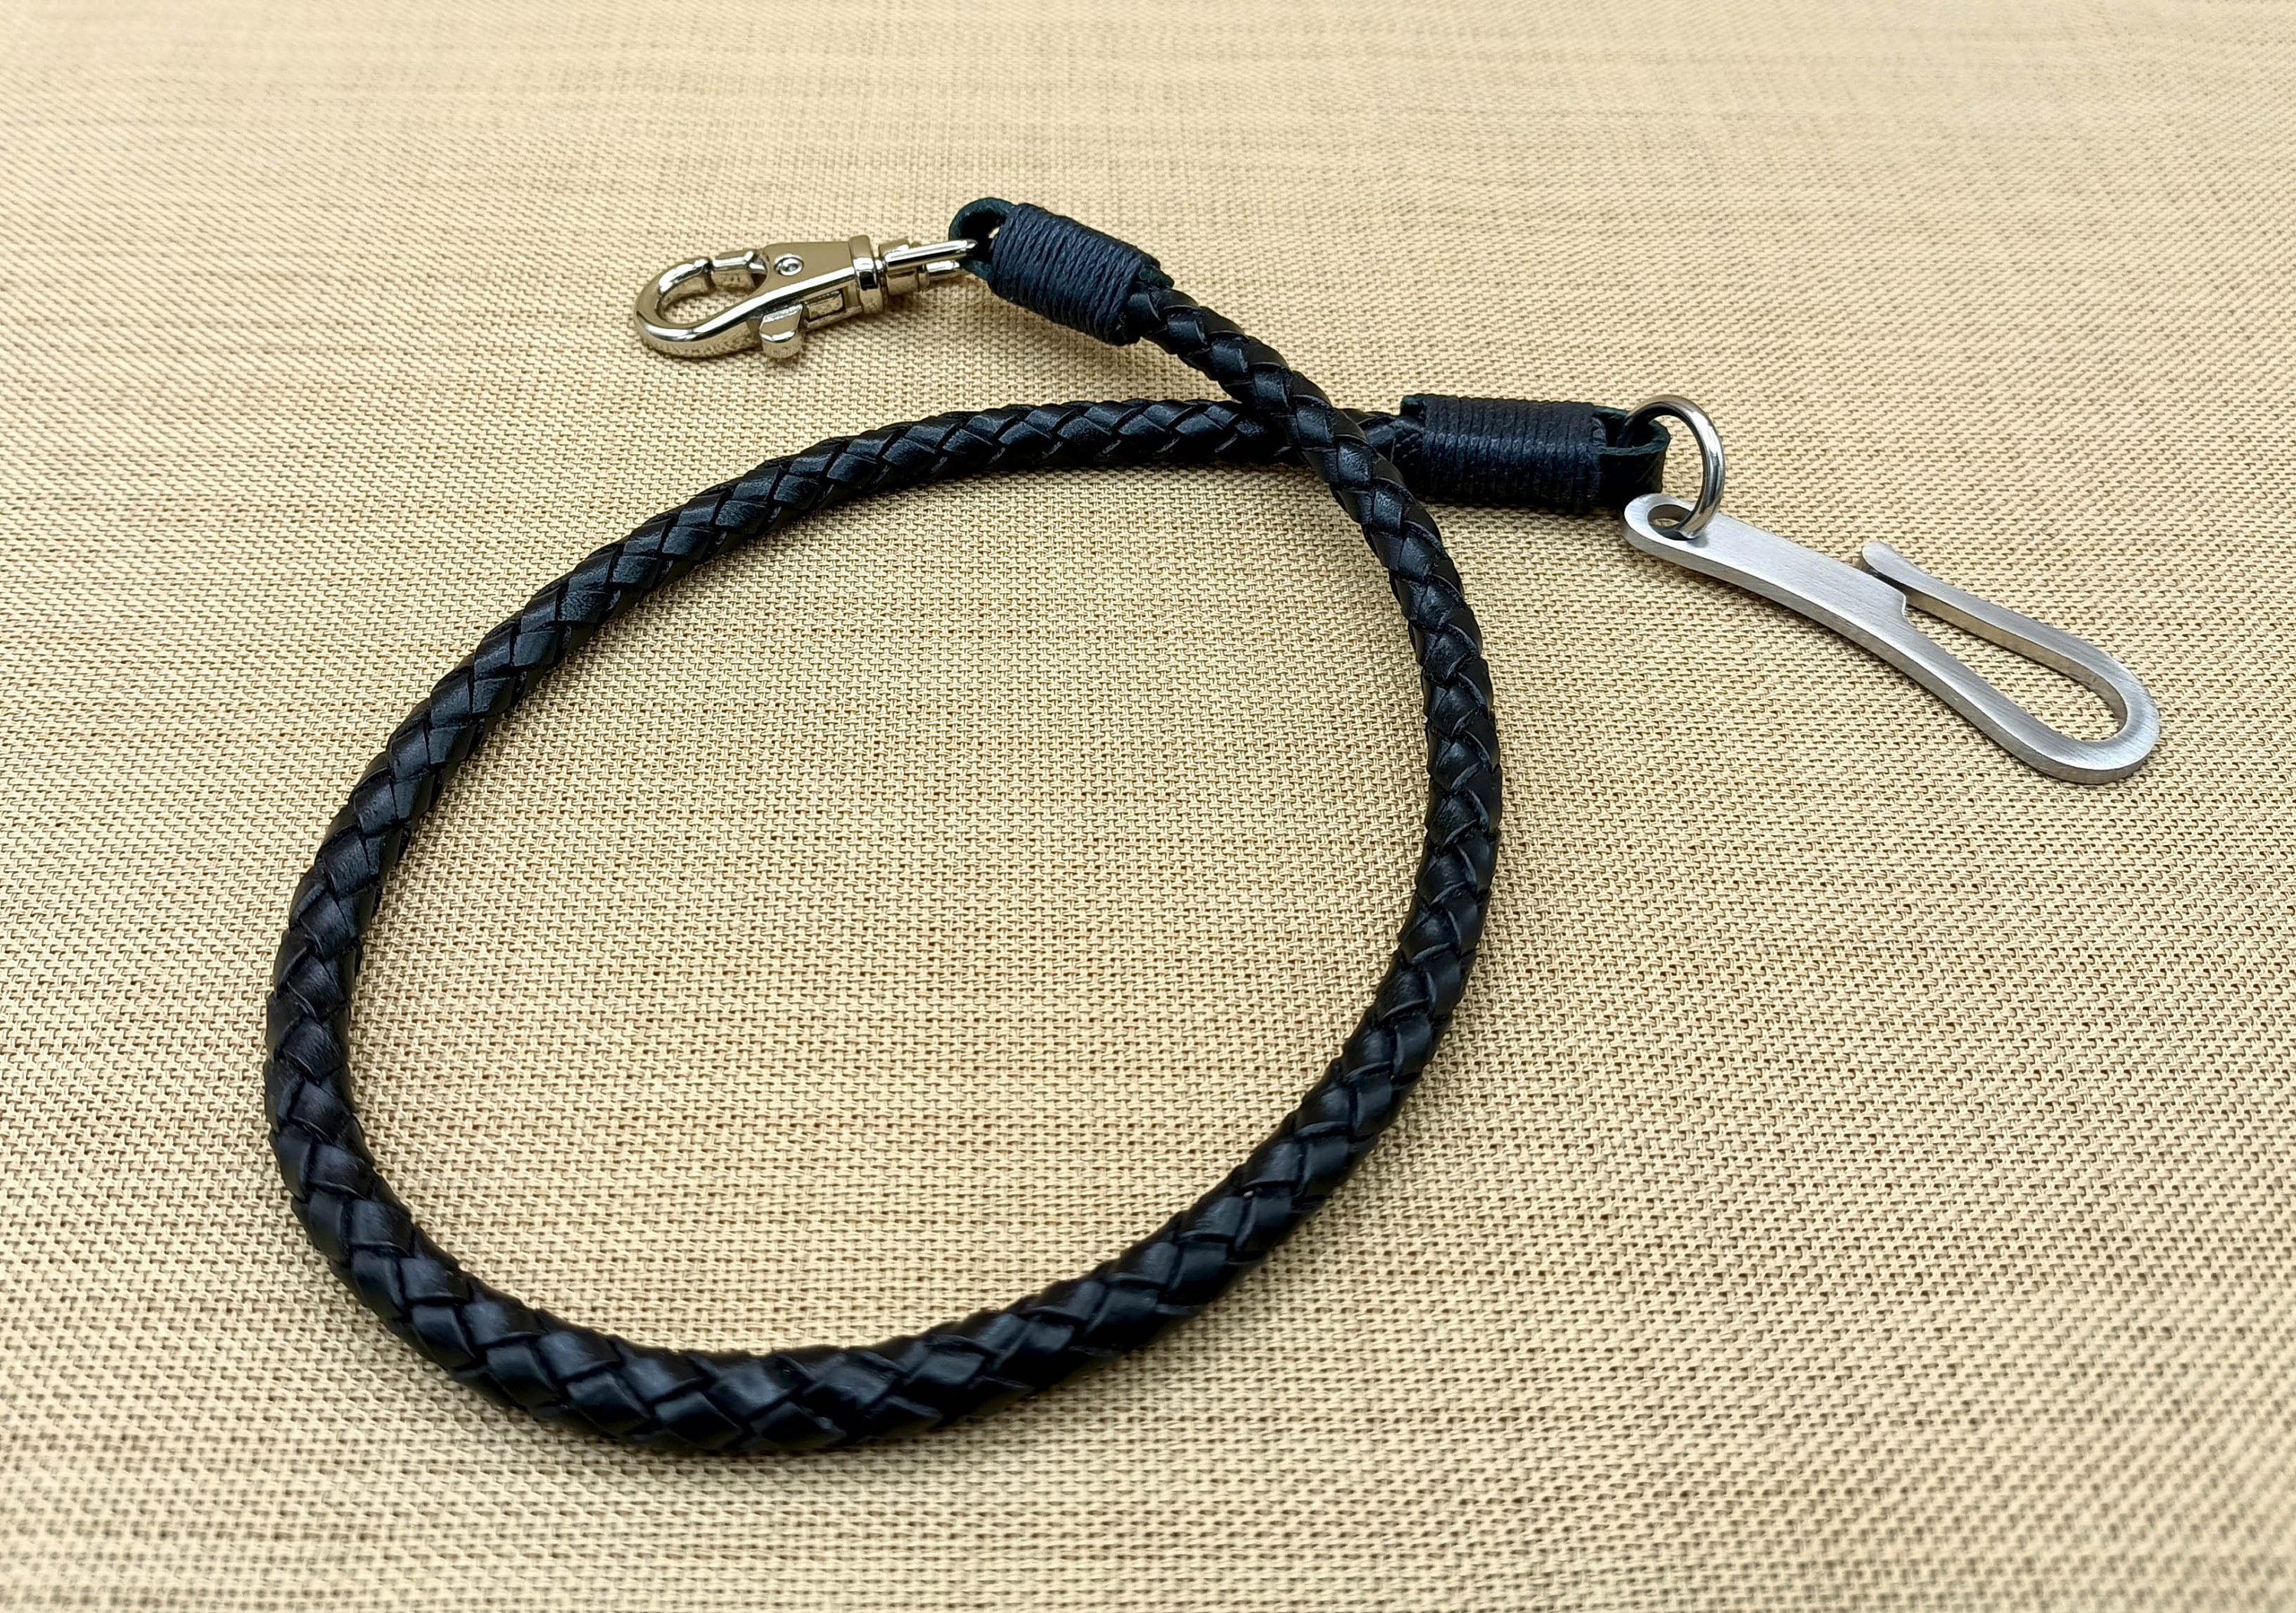 Wholesale WADORN Braided Leather Purse Chain Strap 